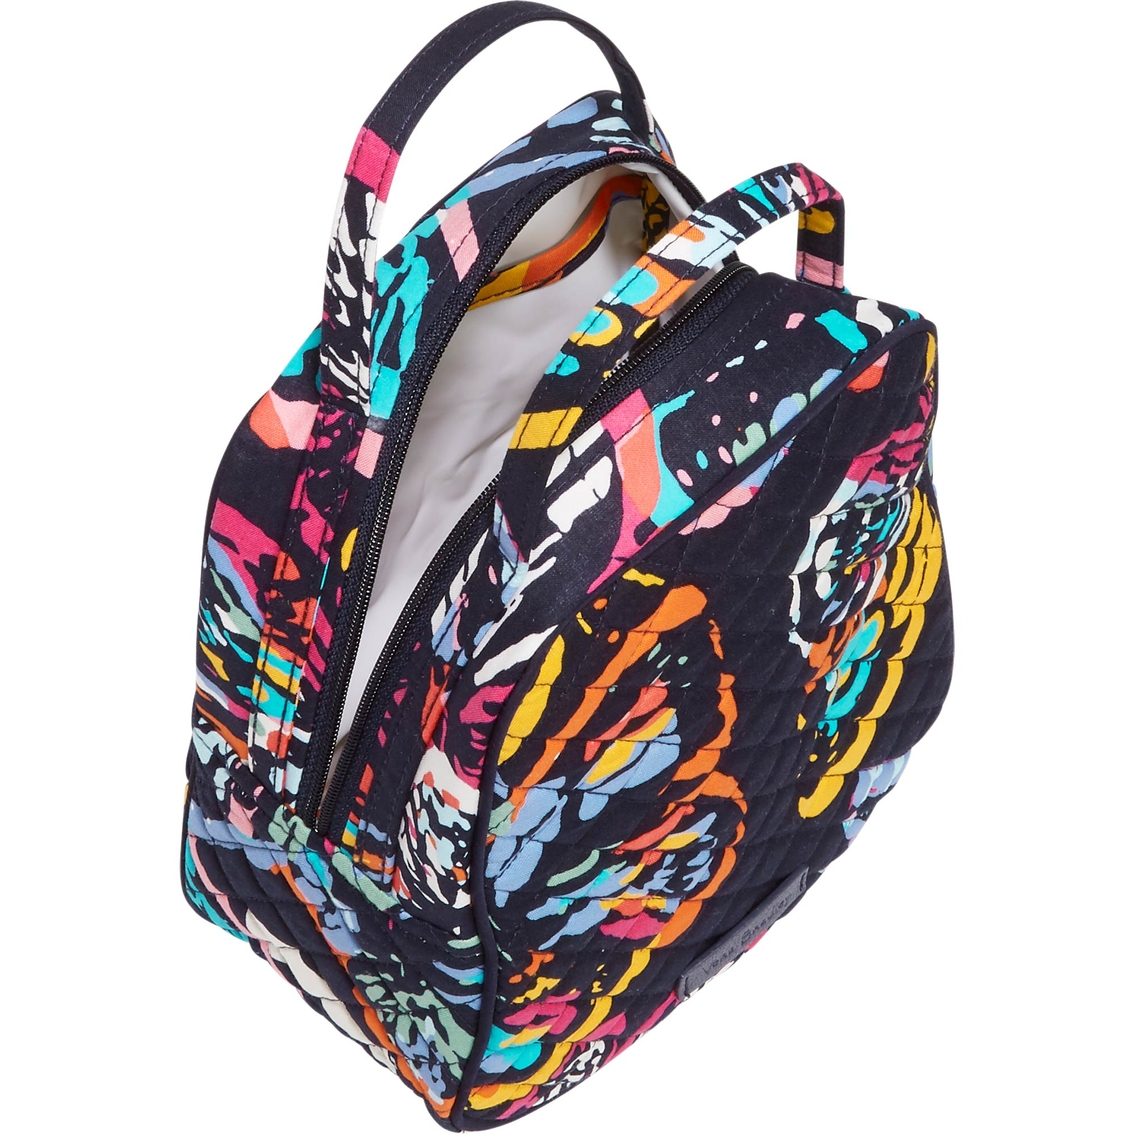 Vera Bradley Iconic Lunch Bunch, Butterfly Flutter - Image 3 of 3